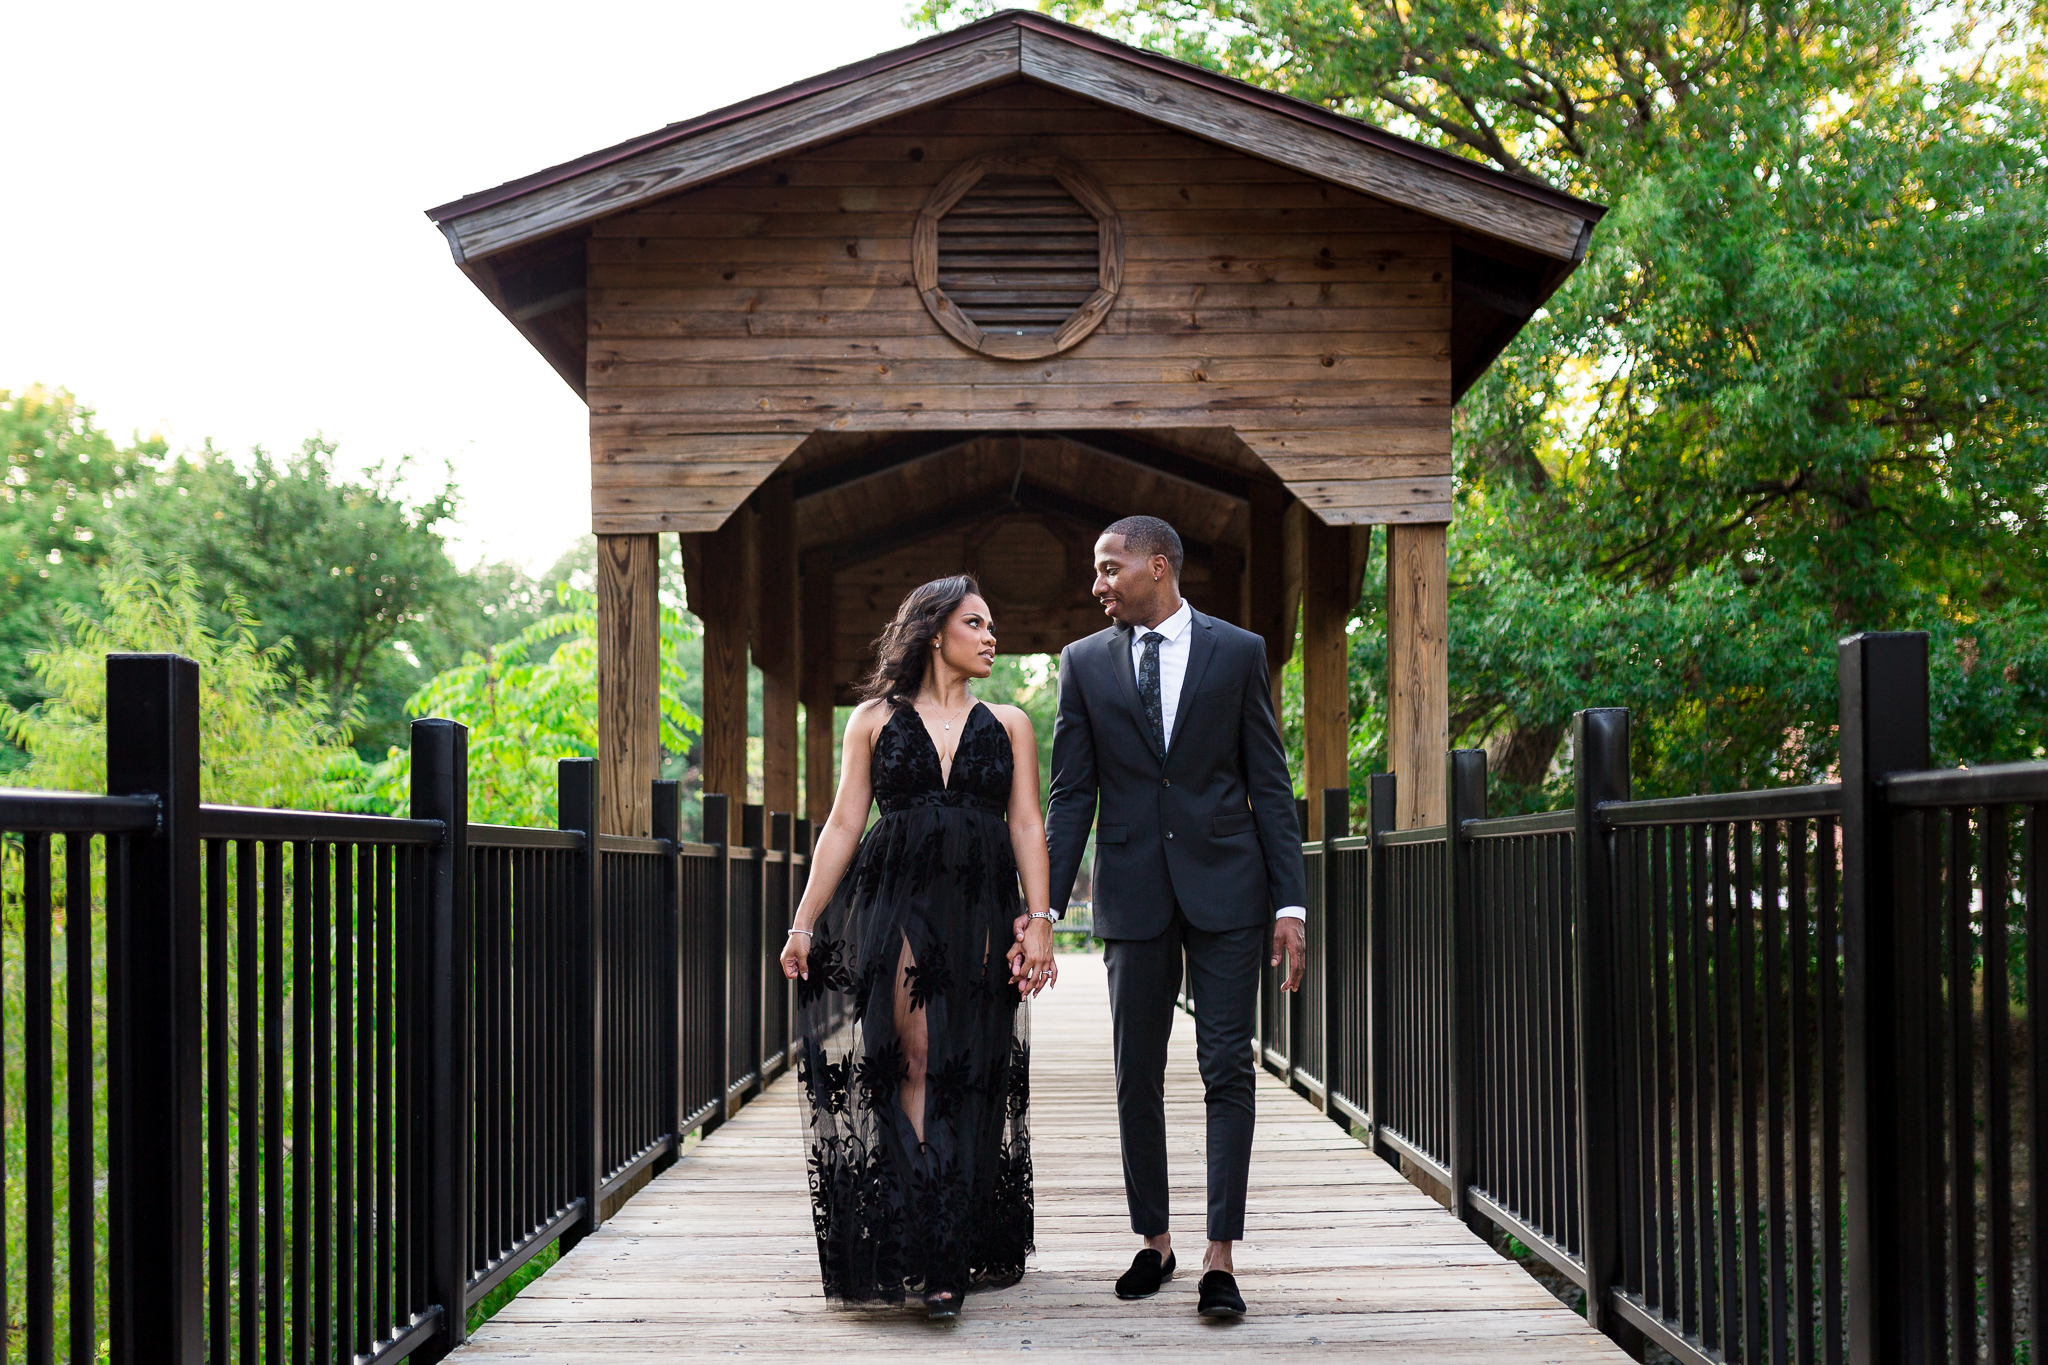 Dallas wedding photographers photographs engagement photos dallas with man and woman holding hands and walking on a bridge together away from a little barn like pergola